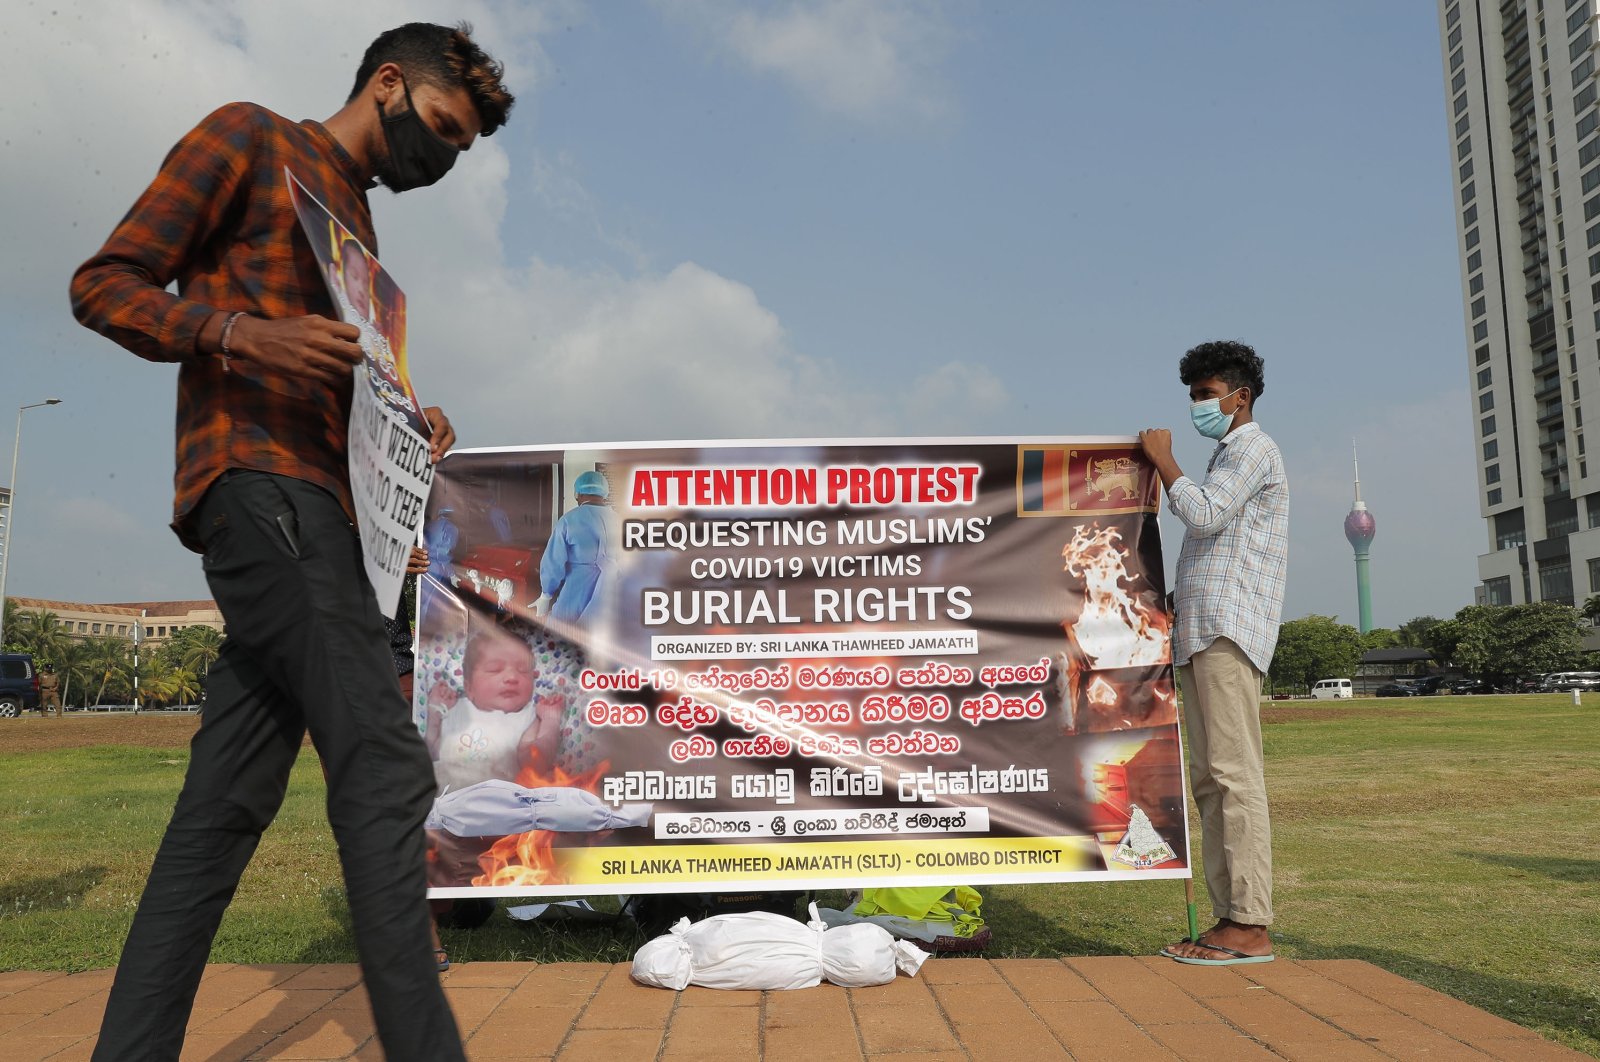 Members of Sri Lanka Thawheed Jamaath, a Muslim organization, display a banner demanding burial rights for Muslims who die of COVID-19, in Colombo, Sri Lanka, Dec. 16, 2020. (AP Photo)